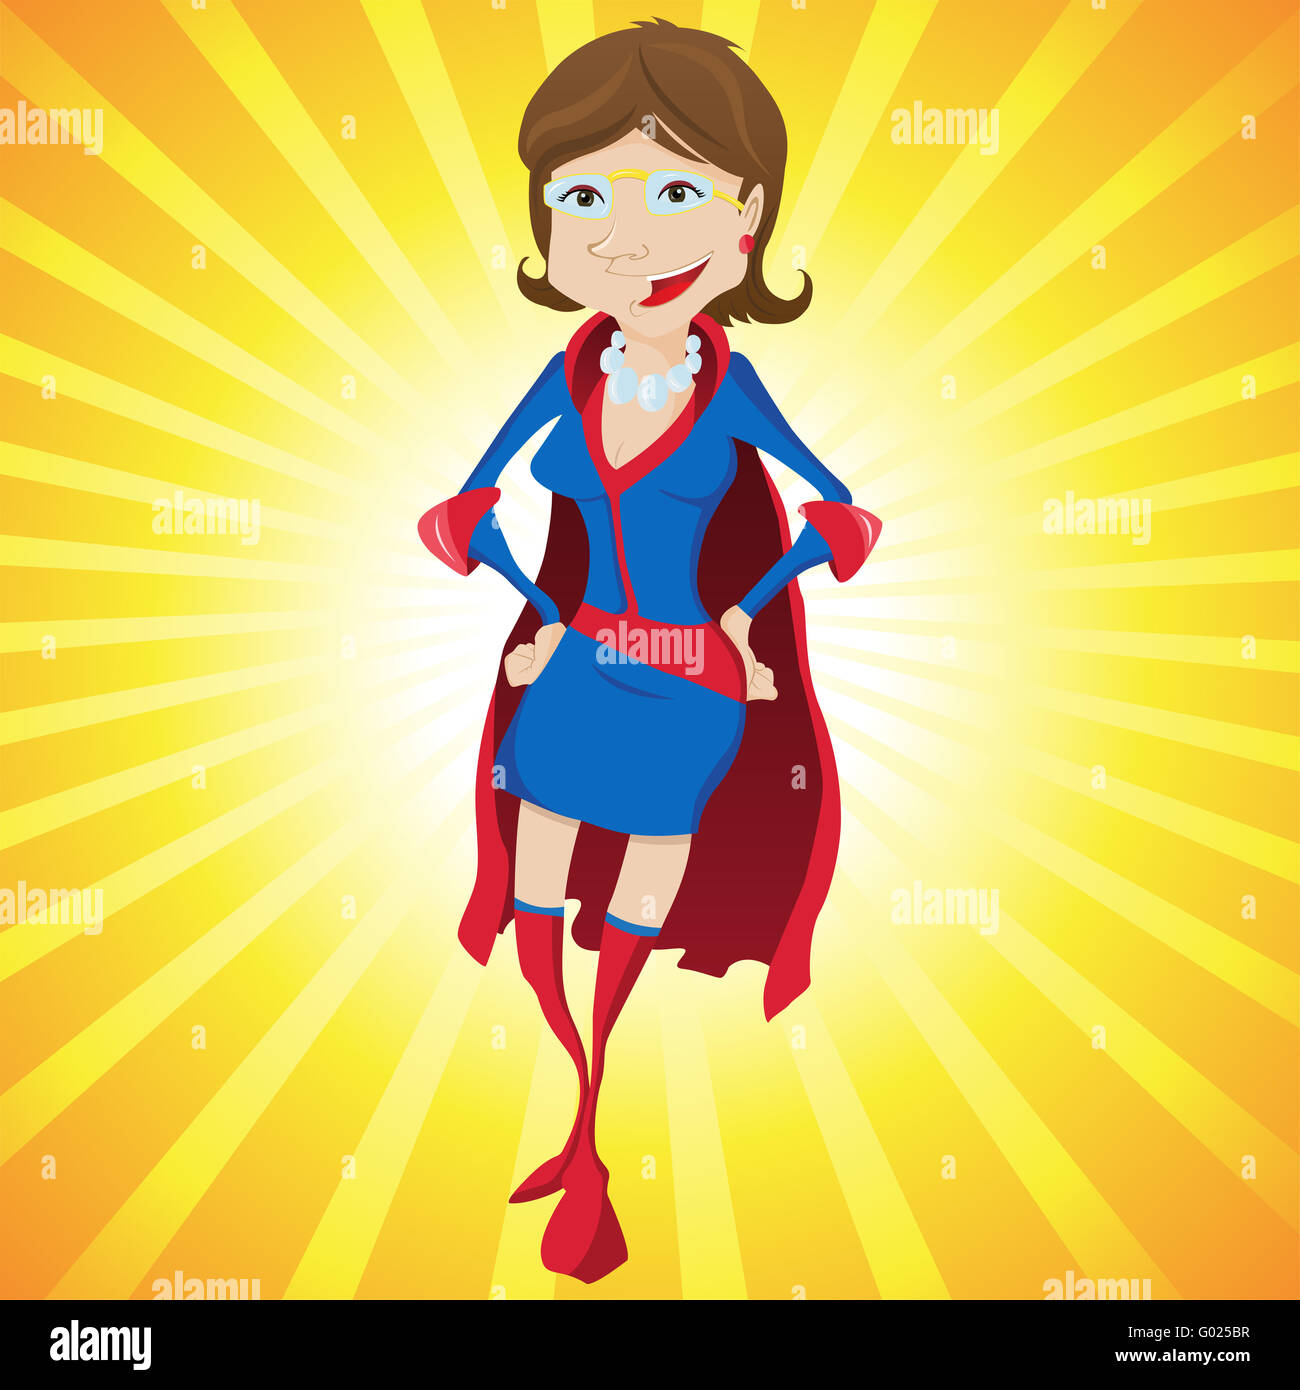 Super Woman Mother Cartoon with Yellow Background. Stock Photo